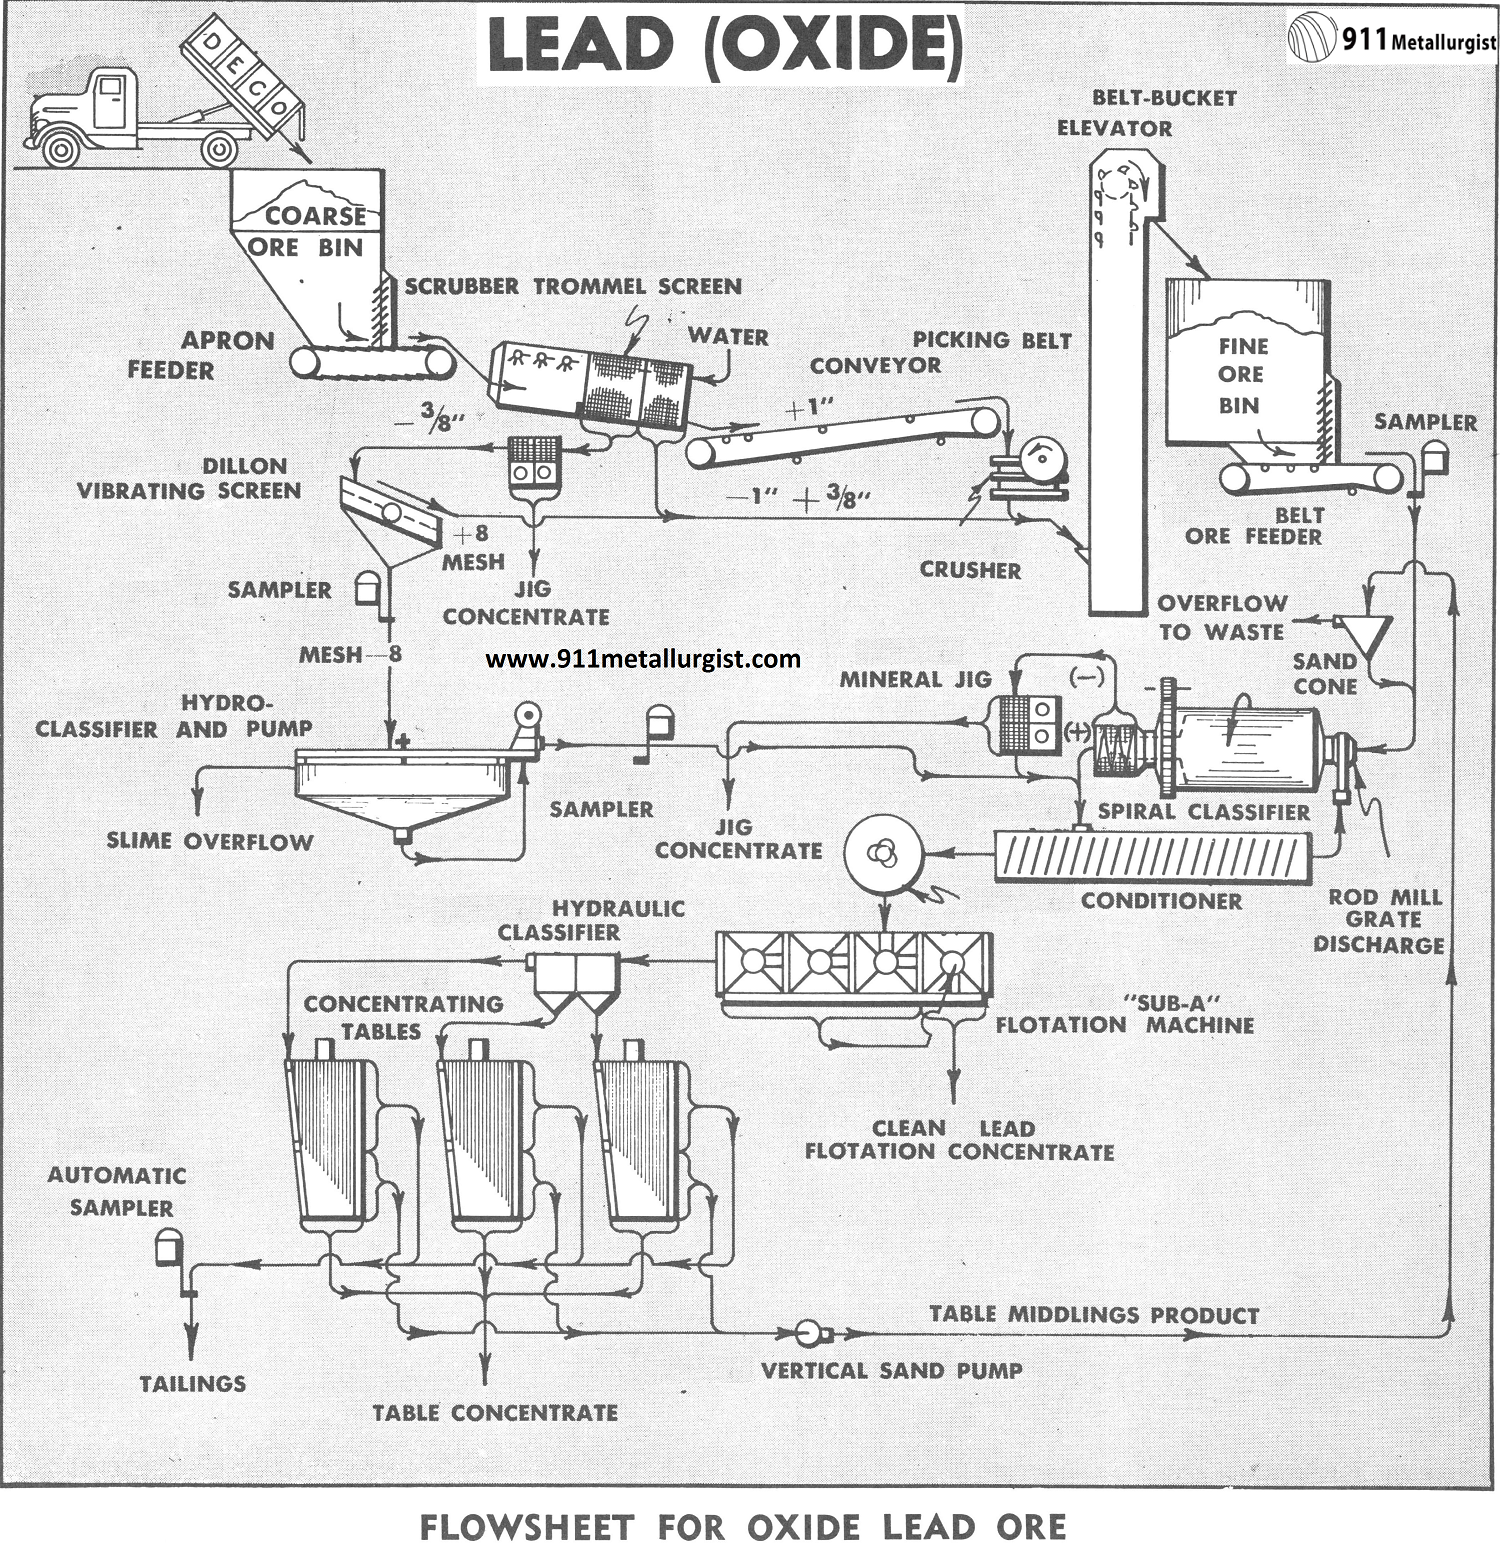 Flowsheet for Oxide Lead Ore